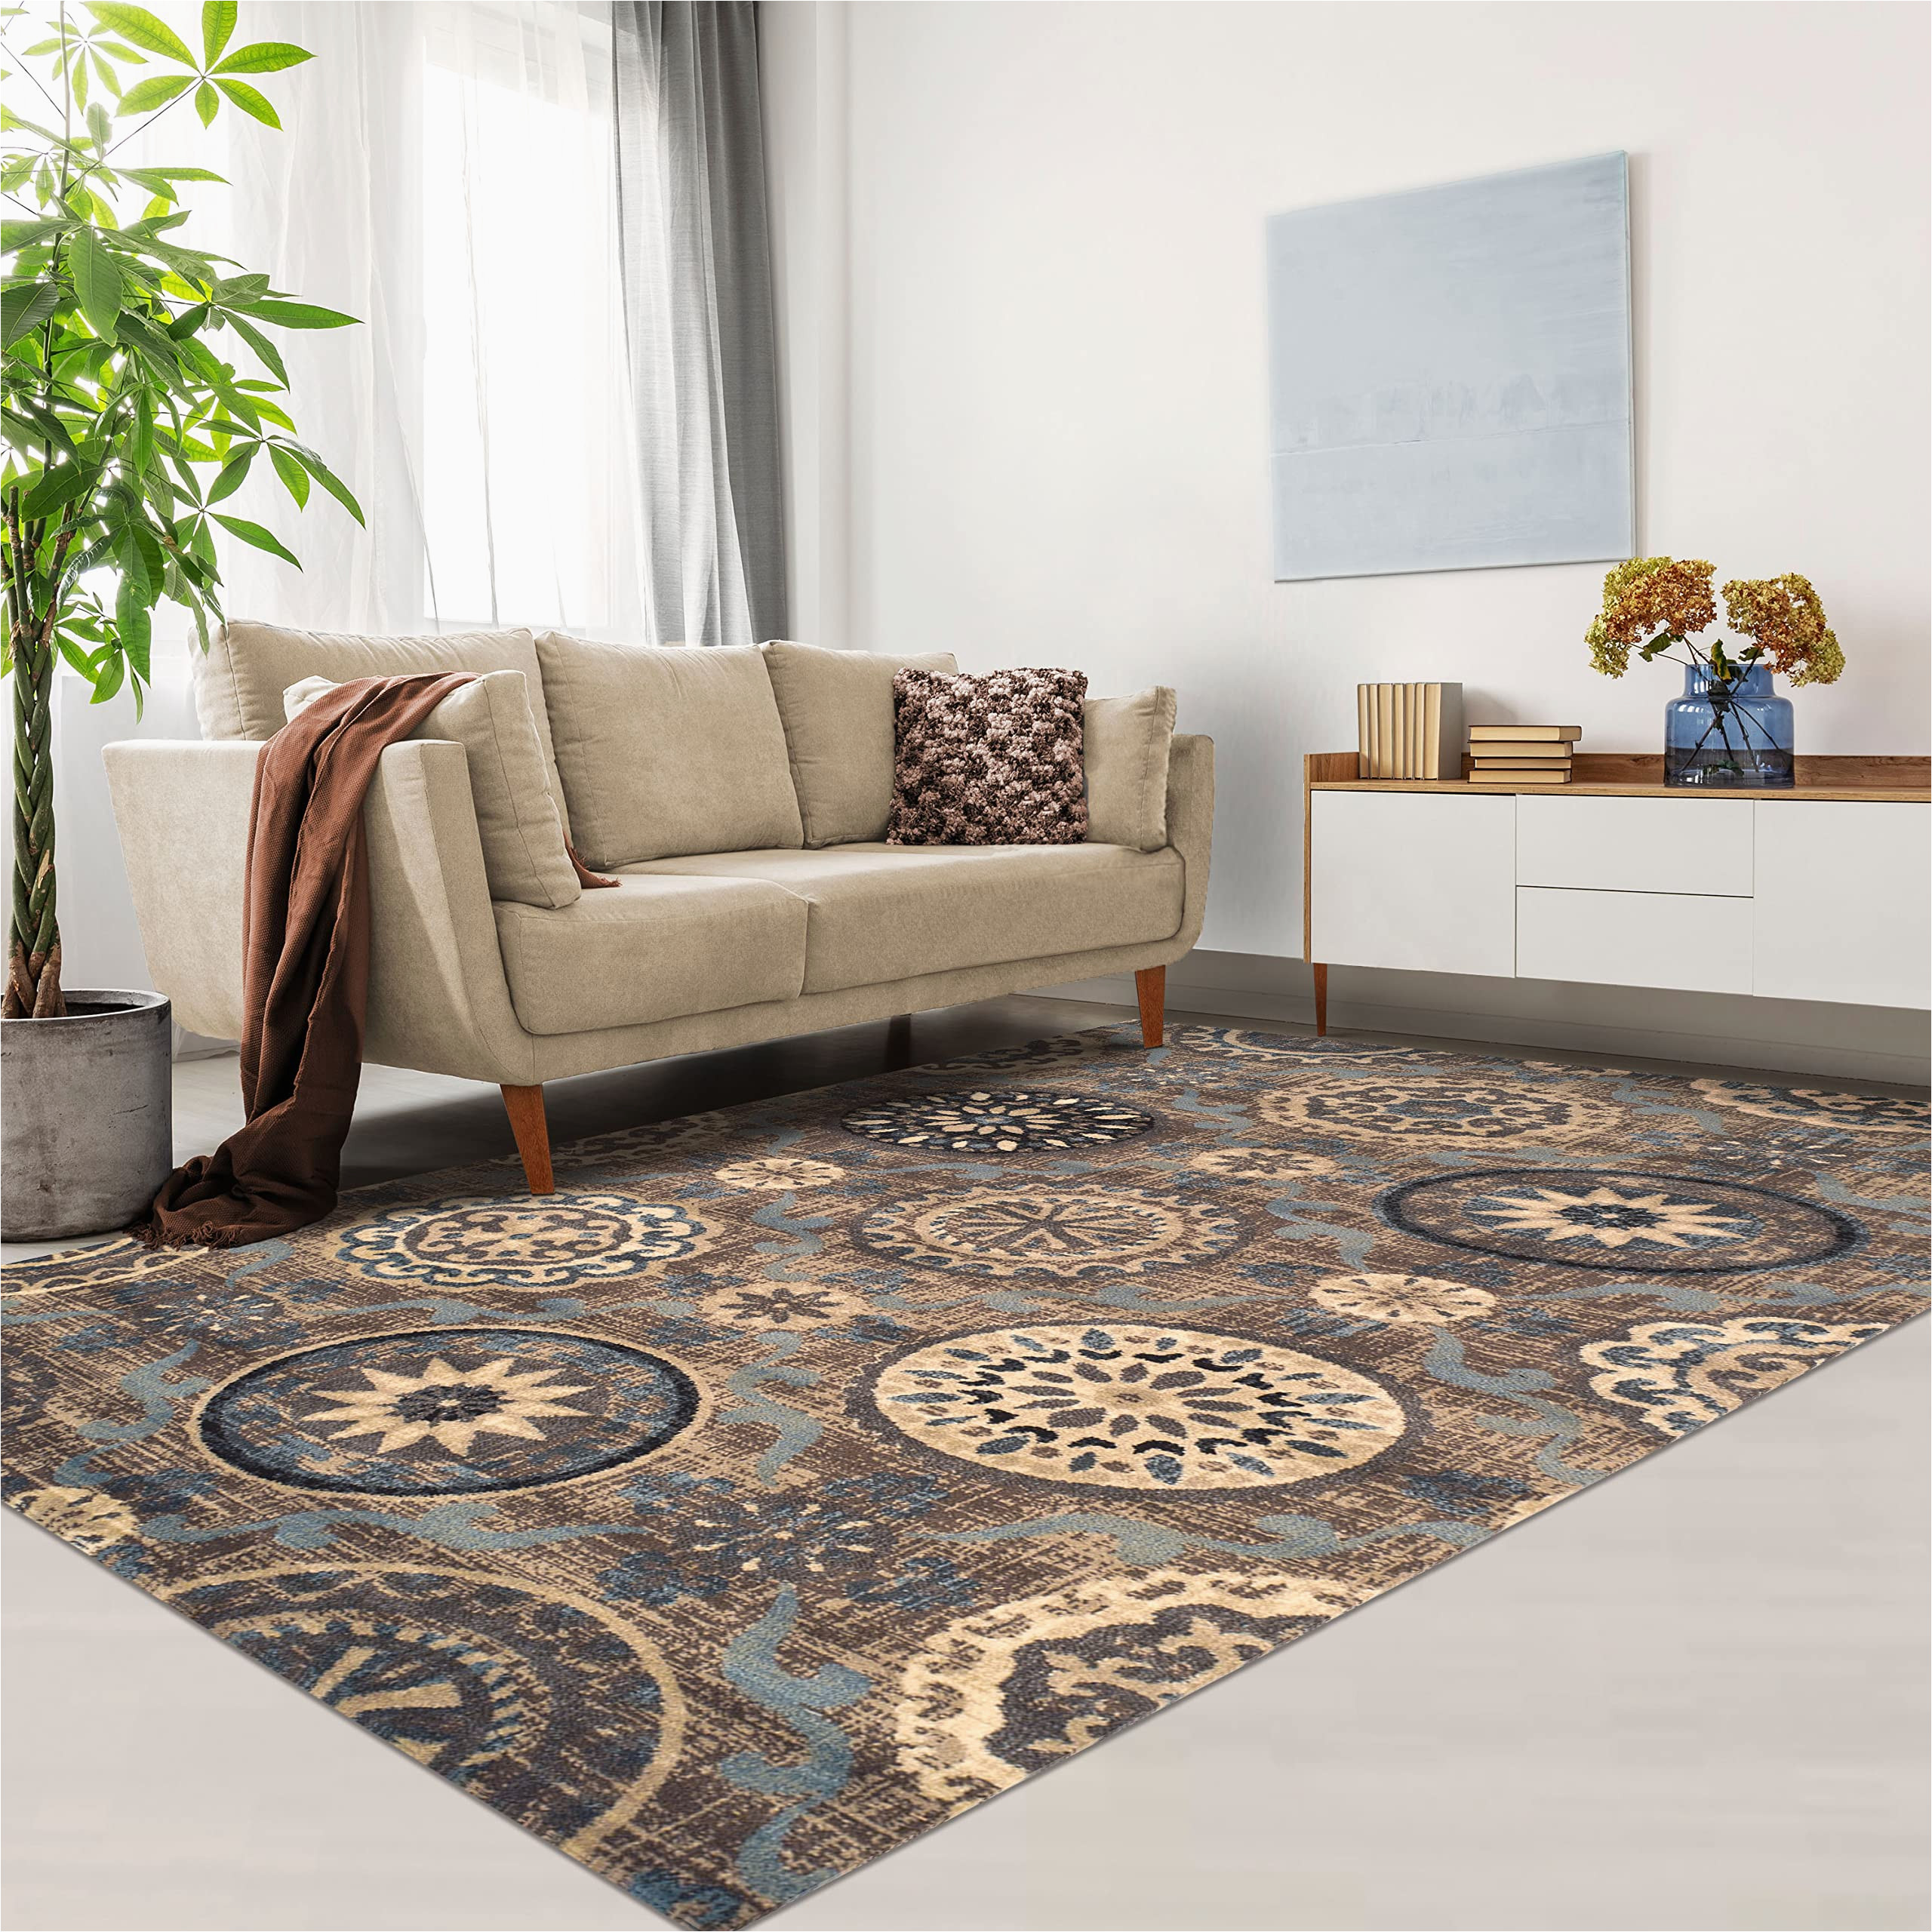 Home Goods area Rugs 8 X 10 Superior Indoor Large area Rug with Jute Backing, Boho Farmhouse Carpet for Home Decor, Perfect for Hardwood Floors, Living Room, Bedroom, Dining …